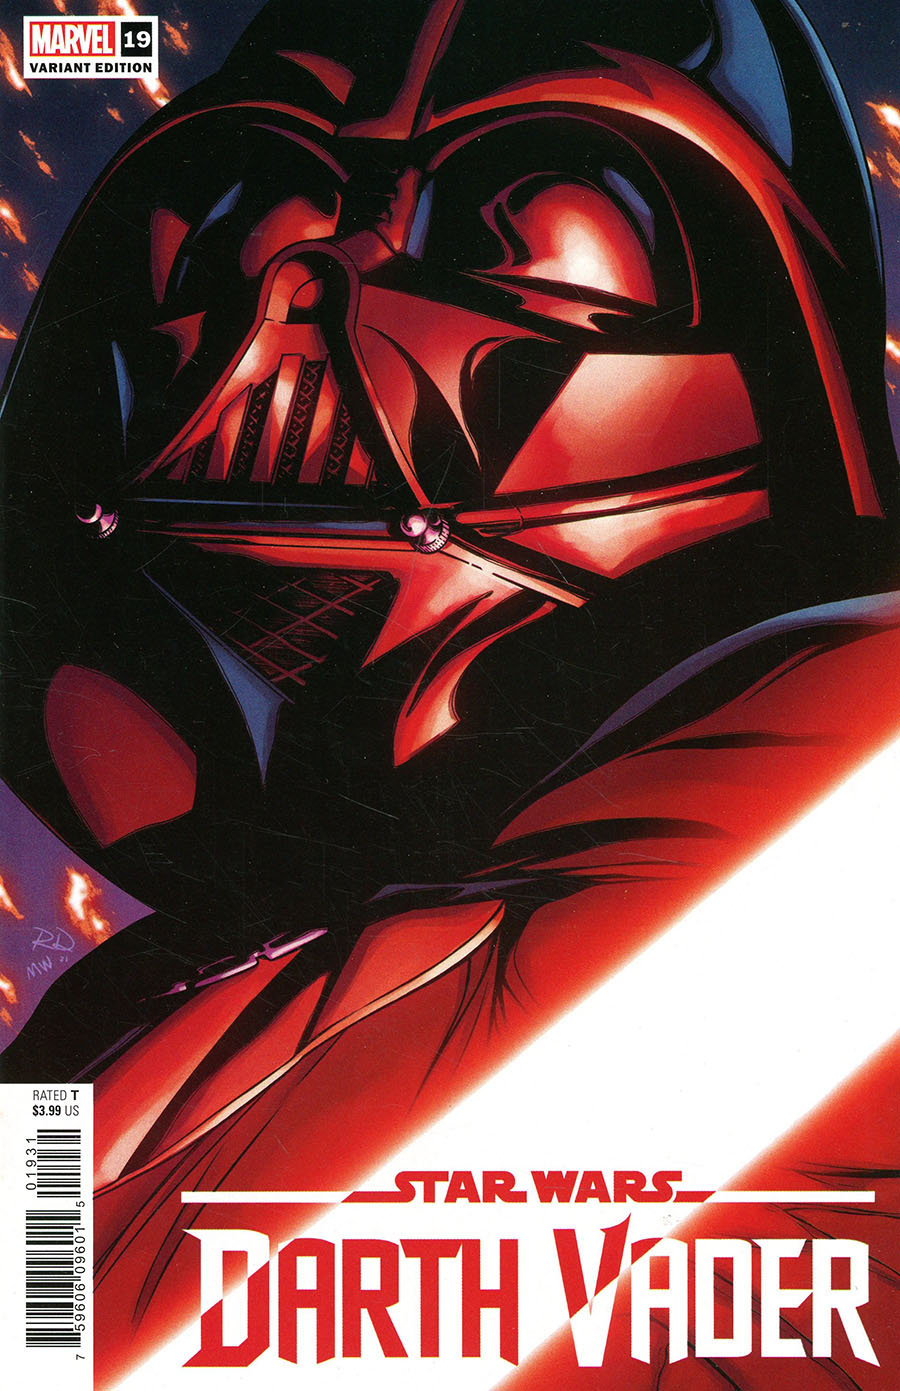 Star Wars Darth Vader #19 Cover C Variant Russell Dauterman Cover